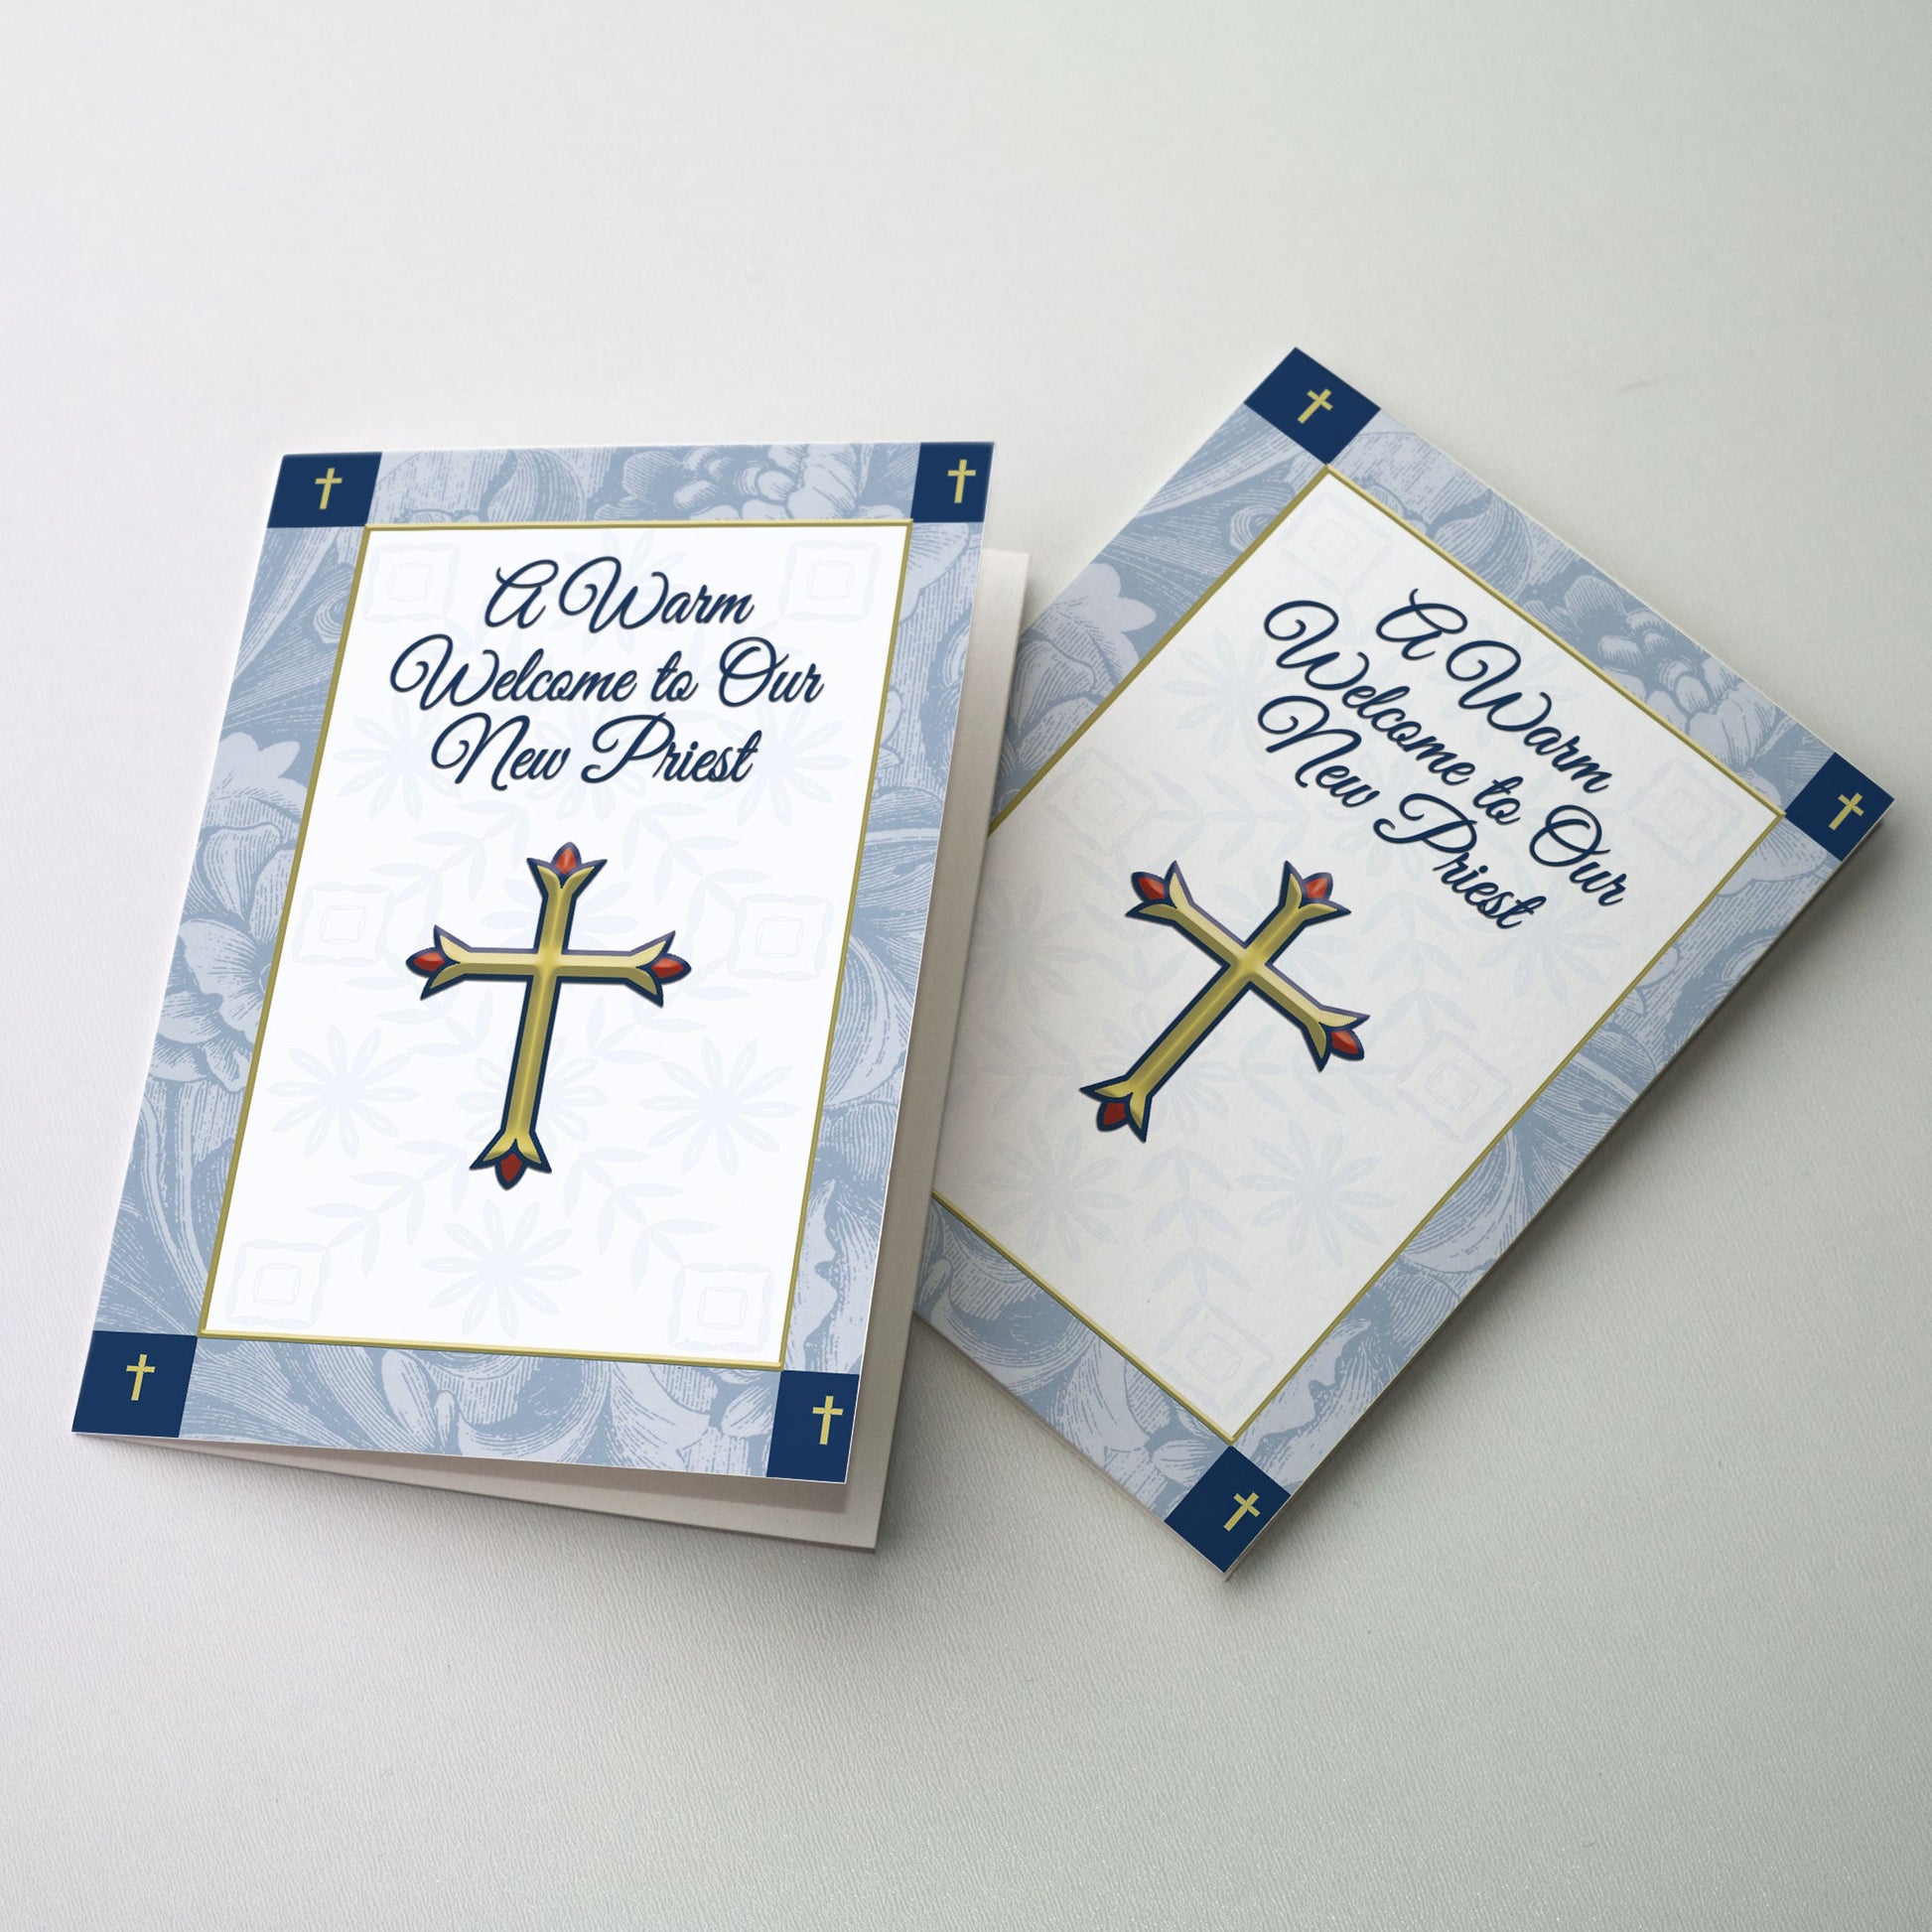 Navy patterned border surrounds cross and cover message